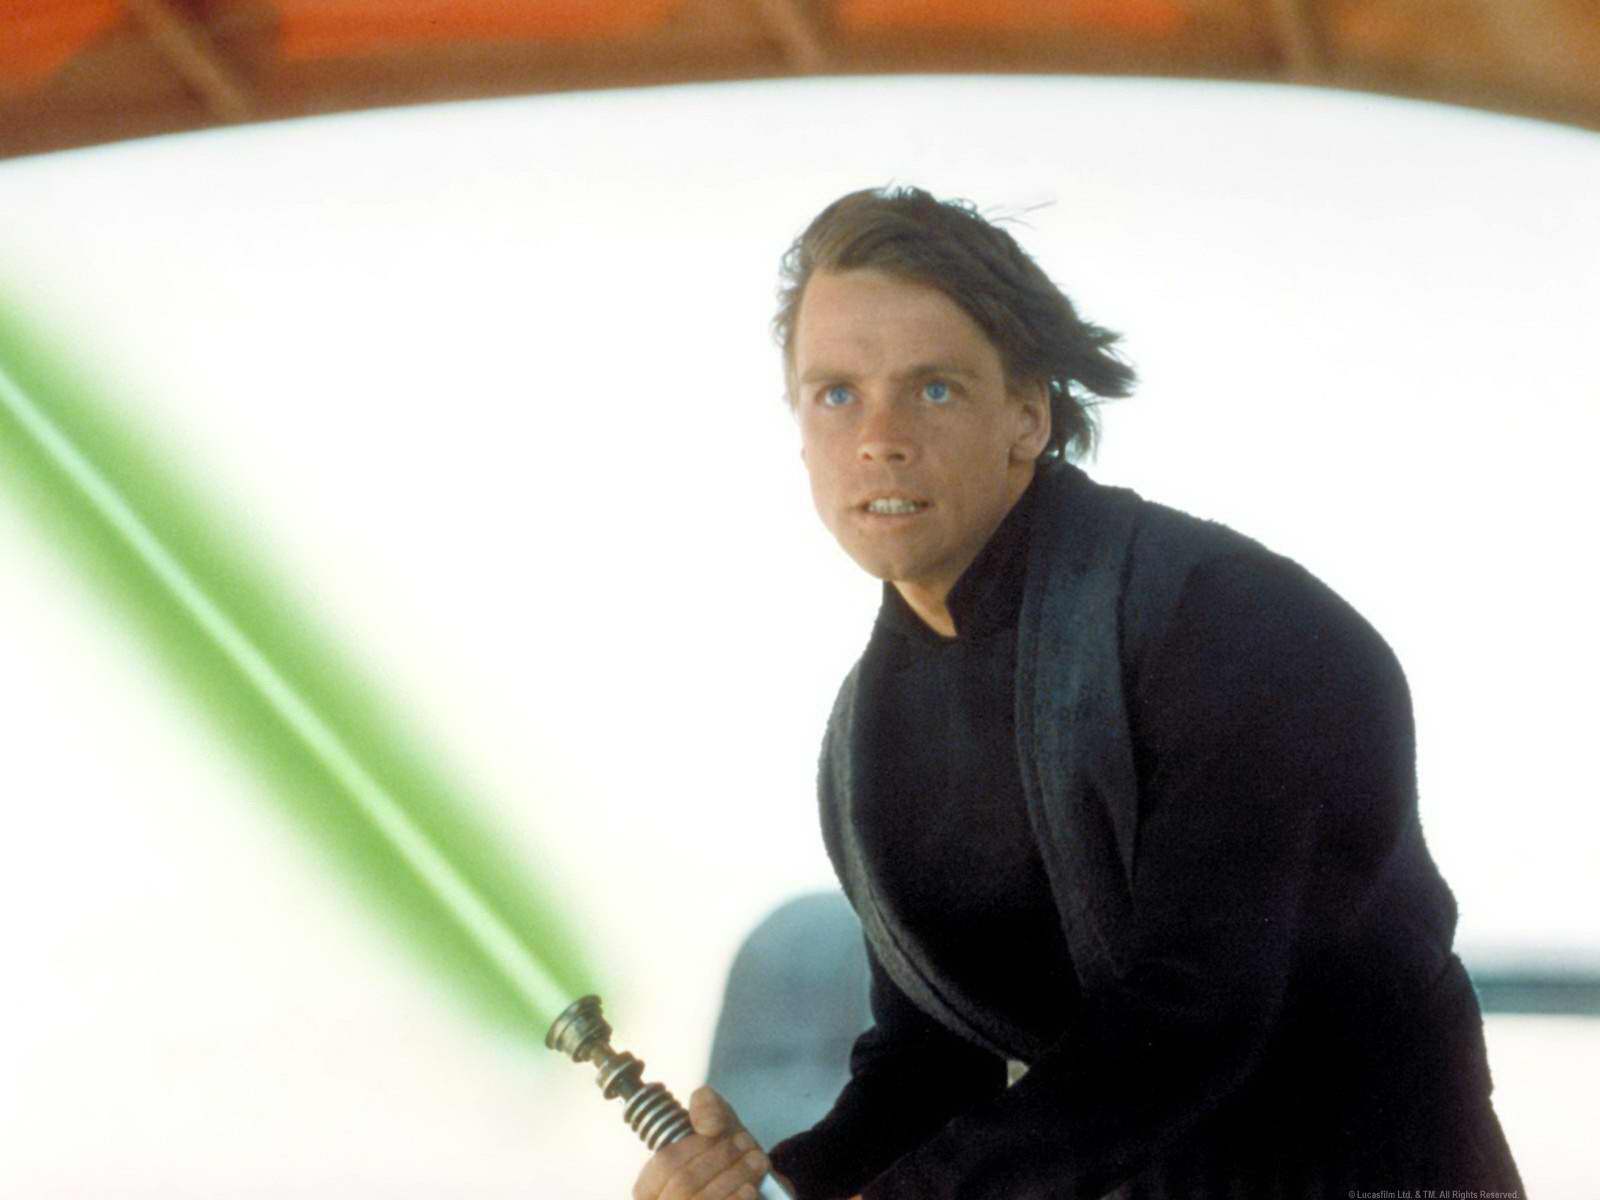 Disney Has Filed a Patent for a Lightsaber With Kenobi